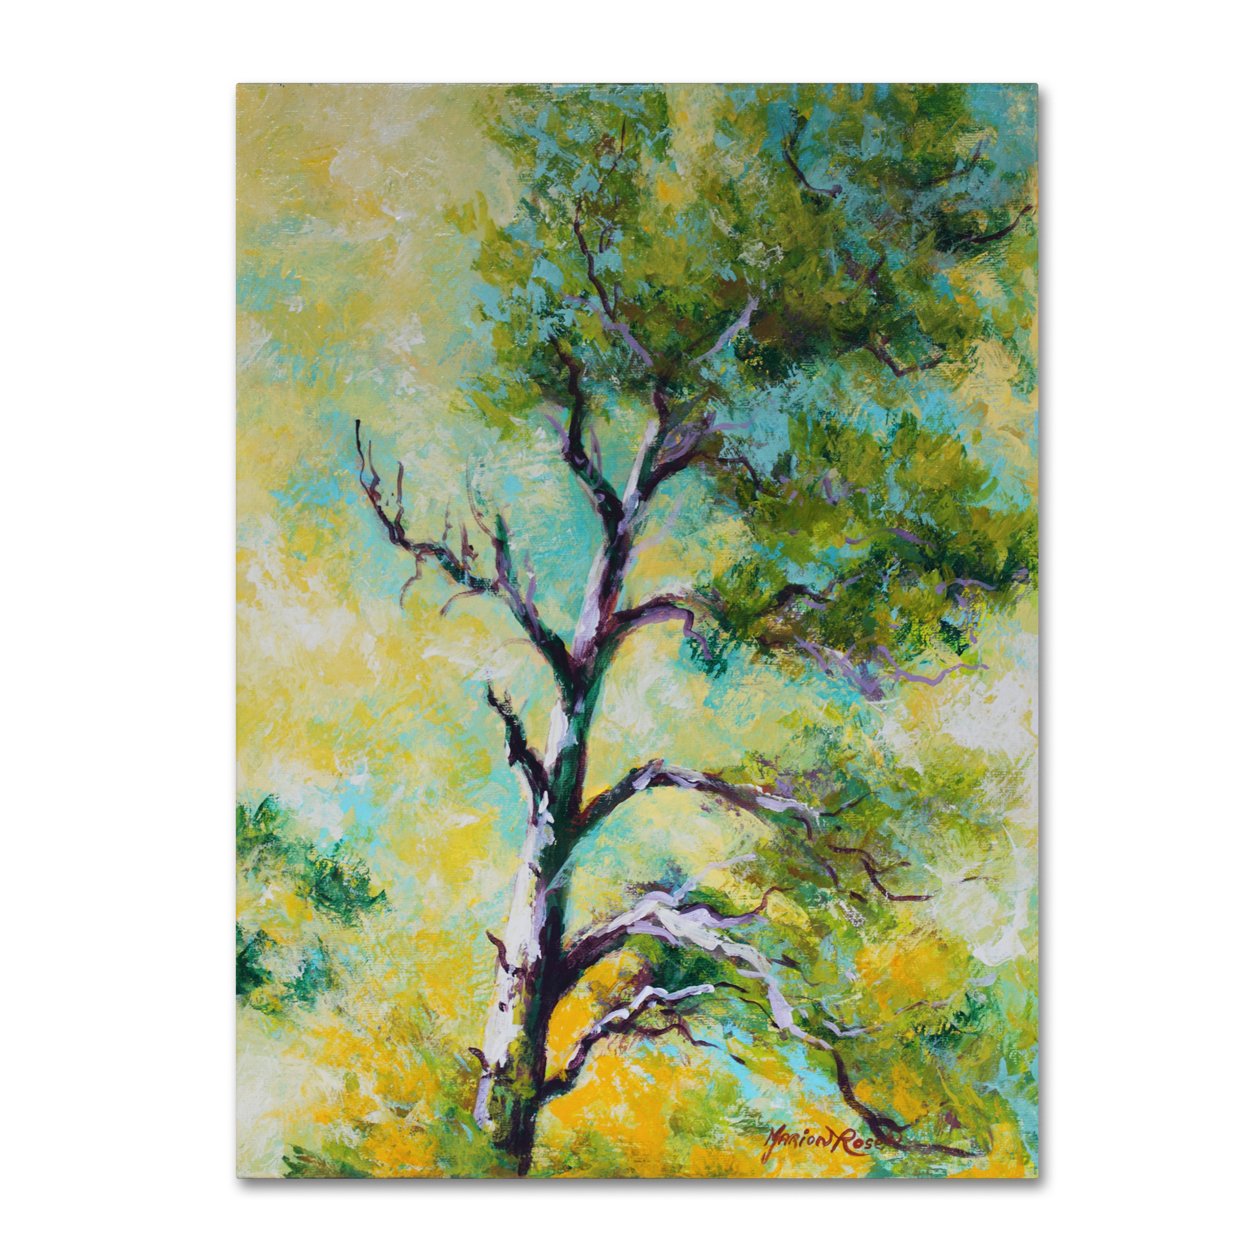 Marion Rose 'Pine Abstract' Ready To Hang Canvas Art 24 X 32 Inches Made In USA